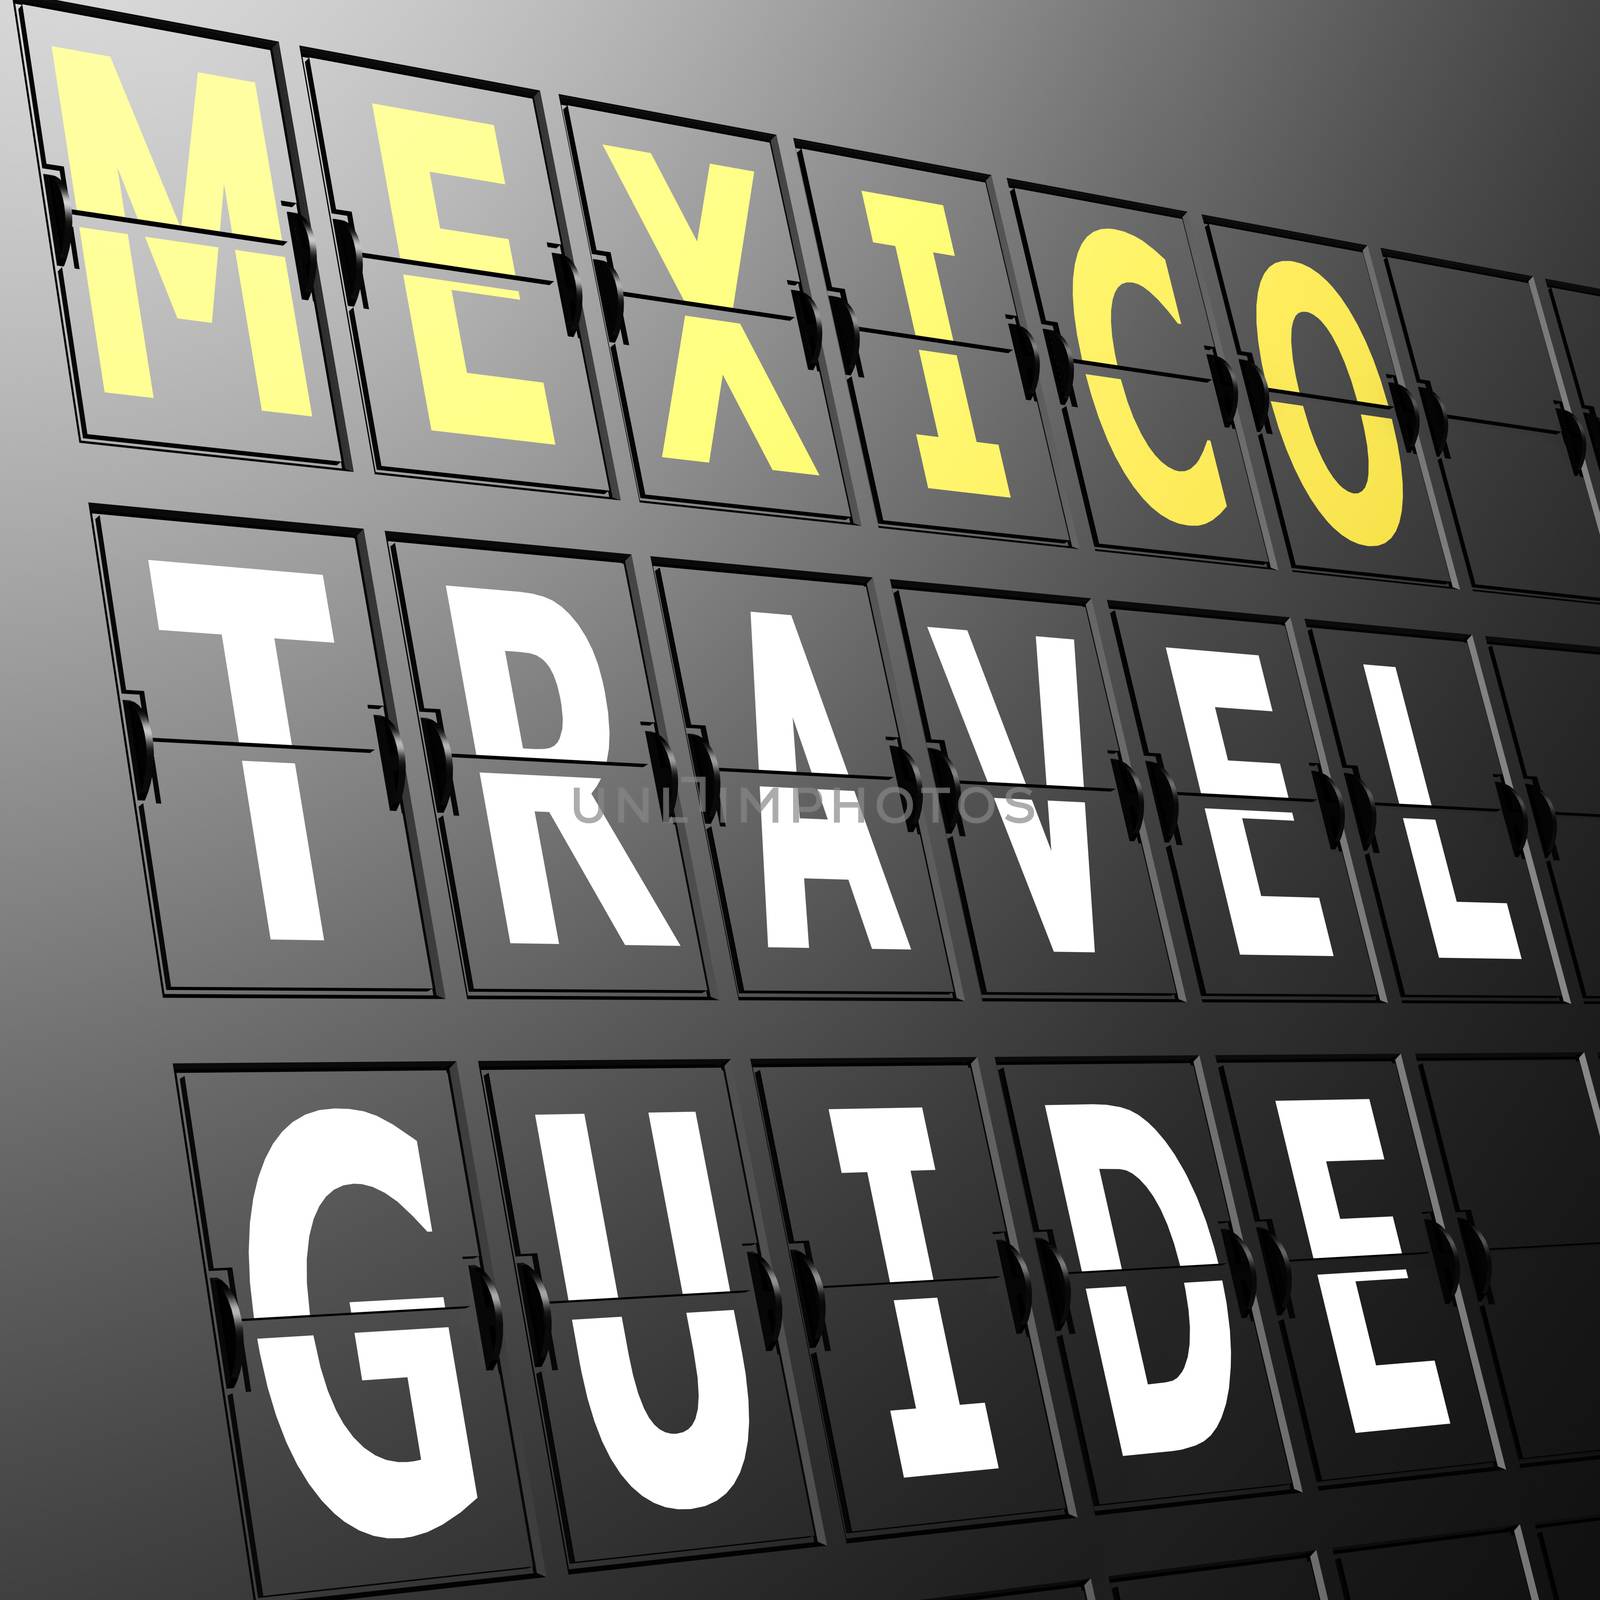 Airport display Mexico travel guide by tang90246